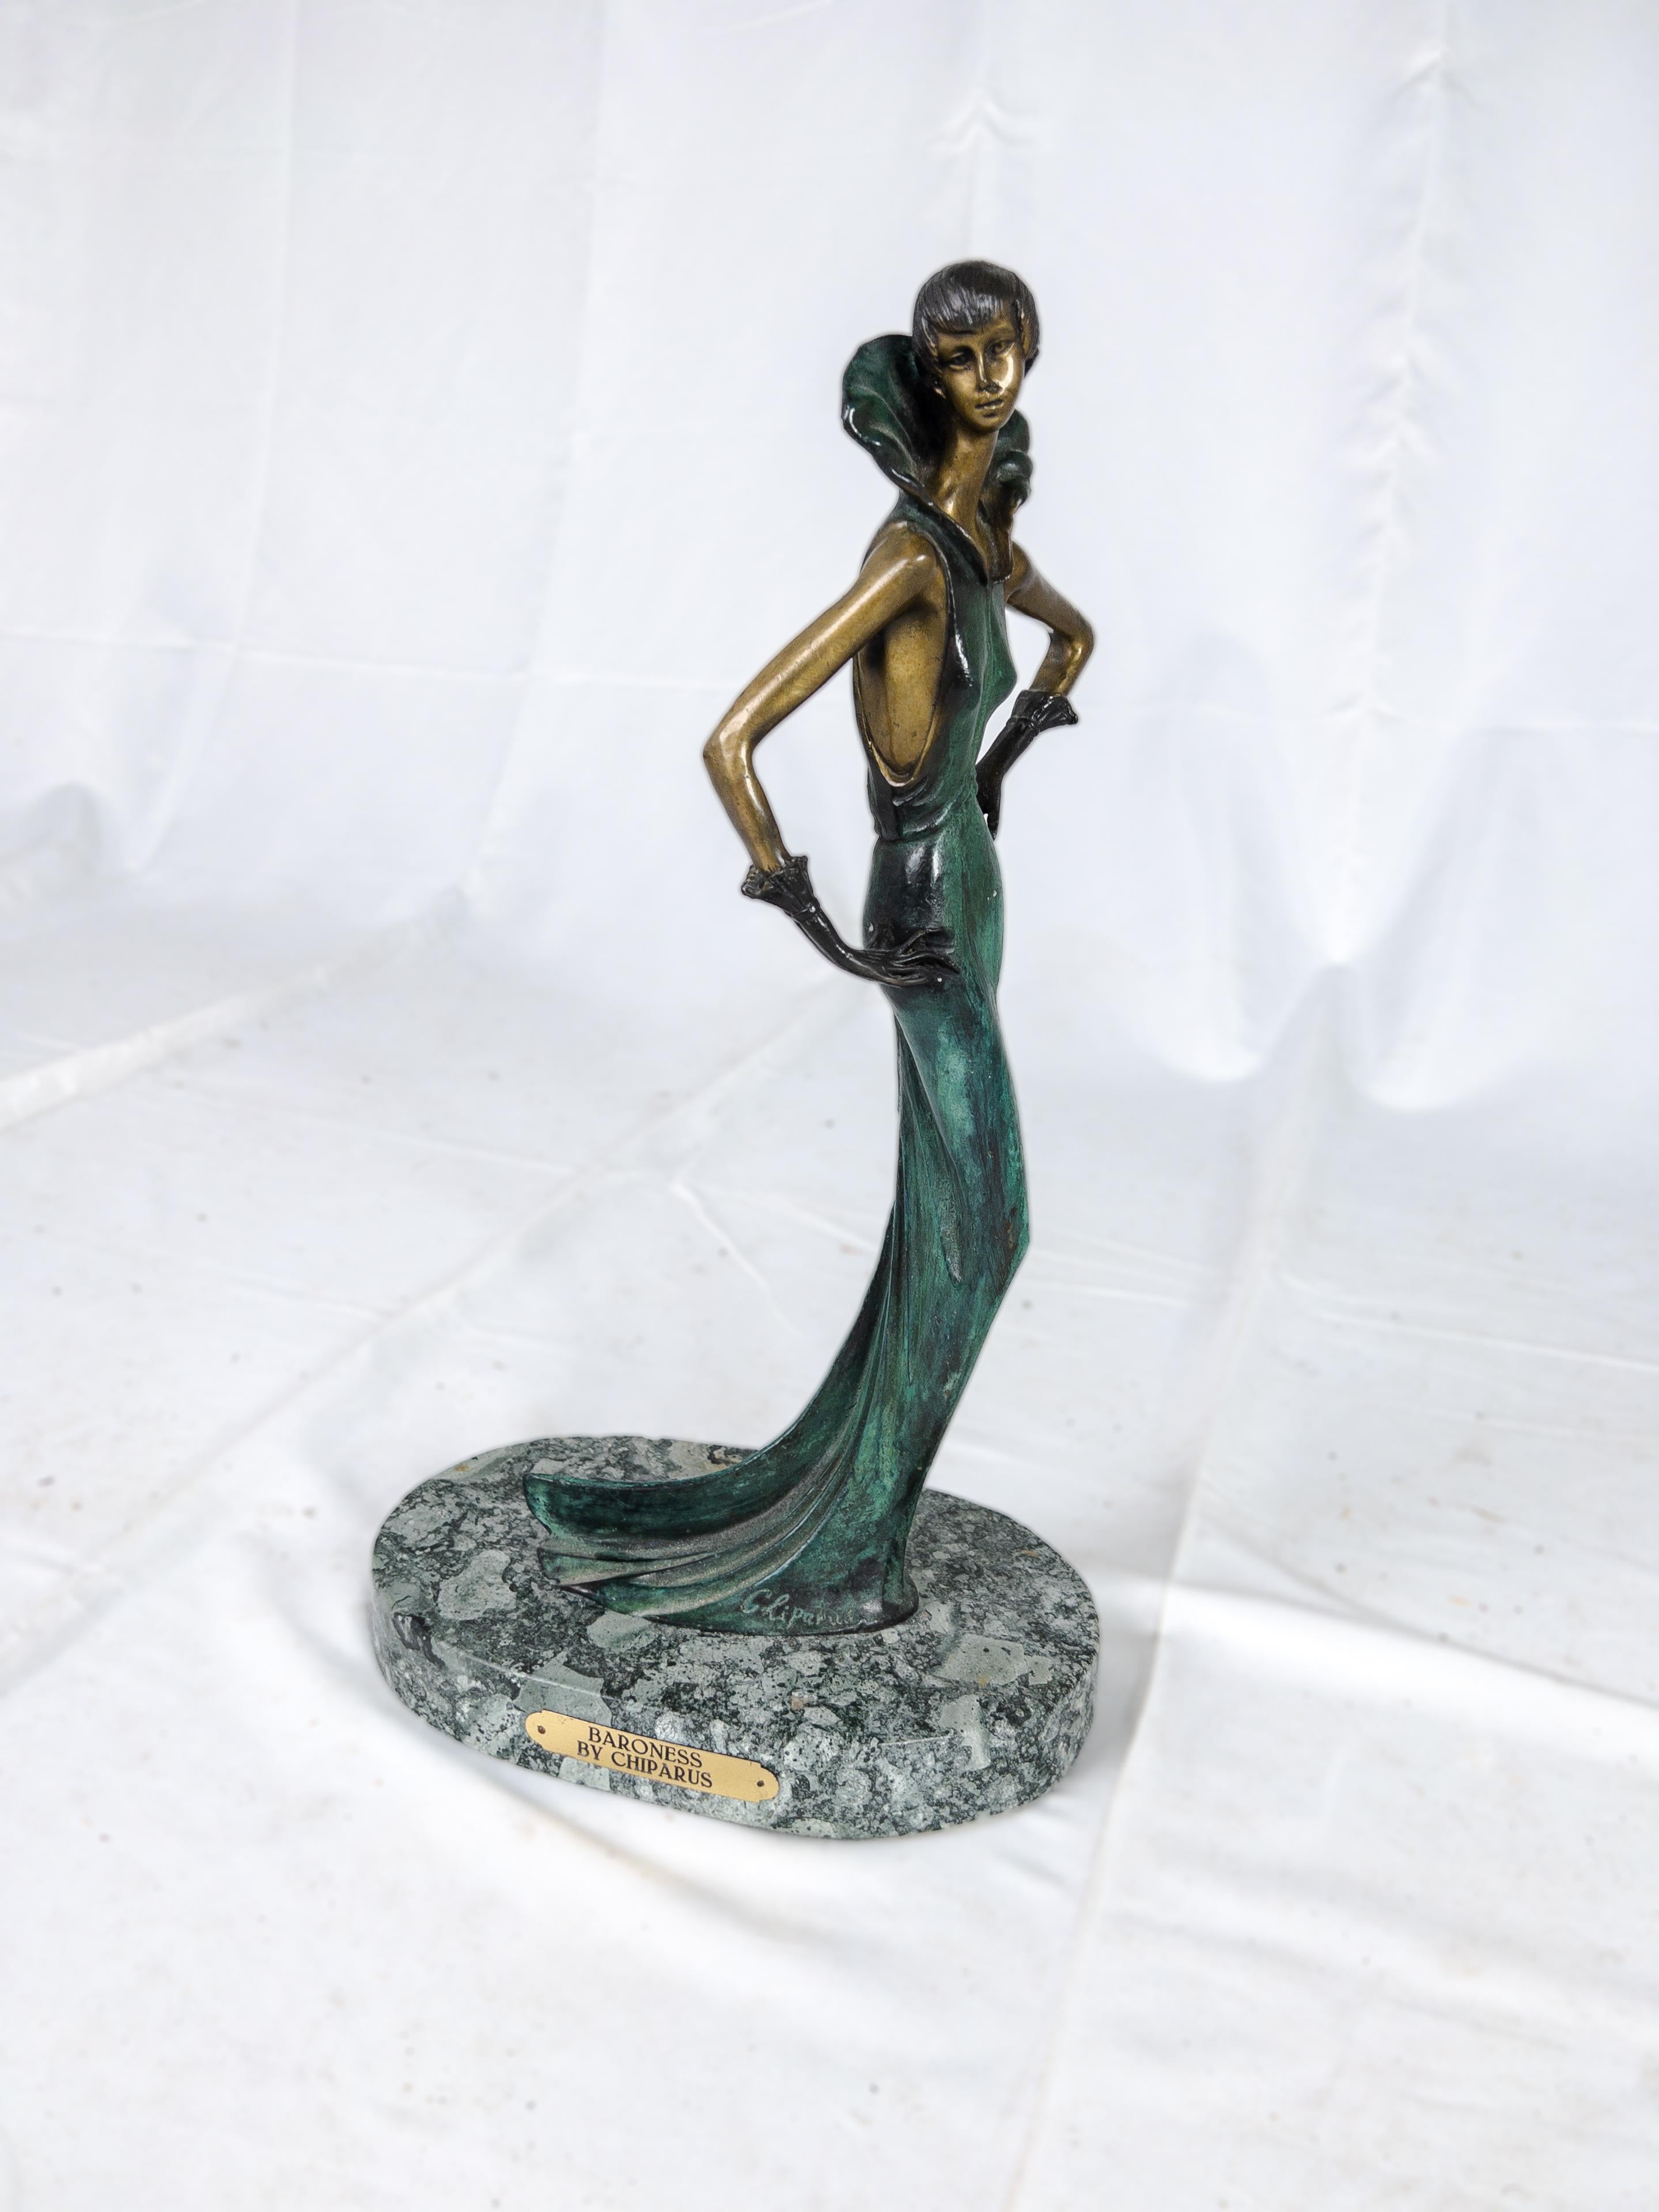 Vintage Demetre Chiparus Baroness Art Deco bronze sculpture.

Vintage Art Deco bronze figural sculpture of a socialite with hood and beautiful draped period clothing by Chiparus called 